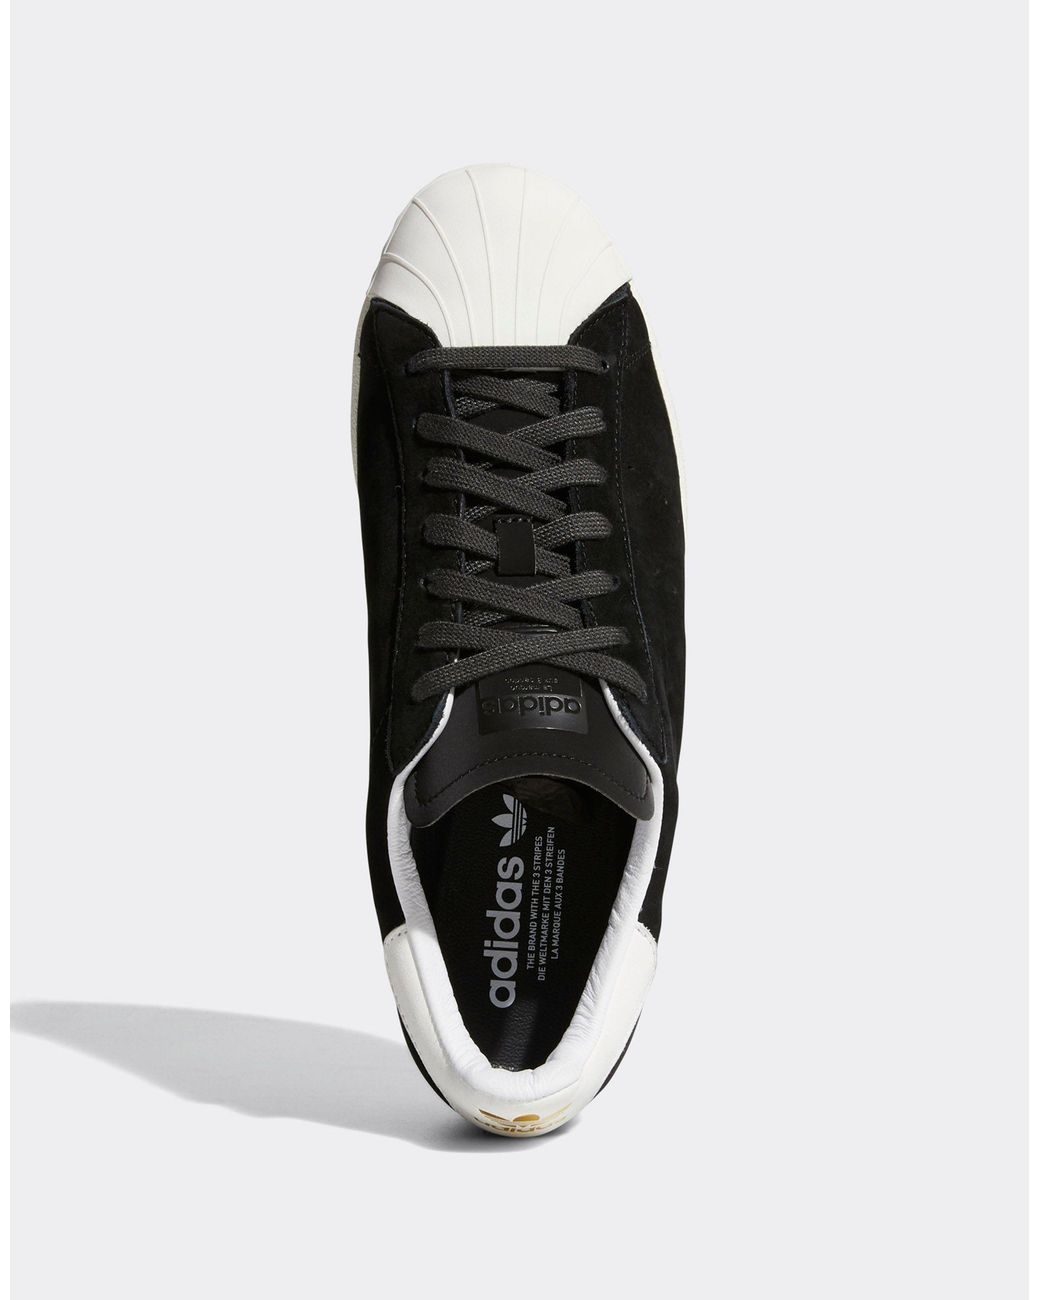 adidas Originals Superstar Trainers New York Series in for | Lyst